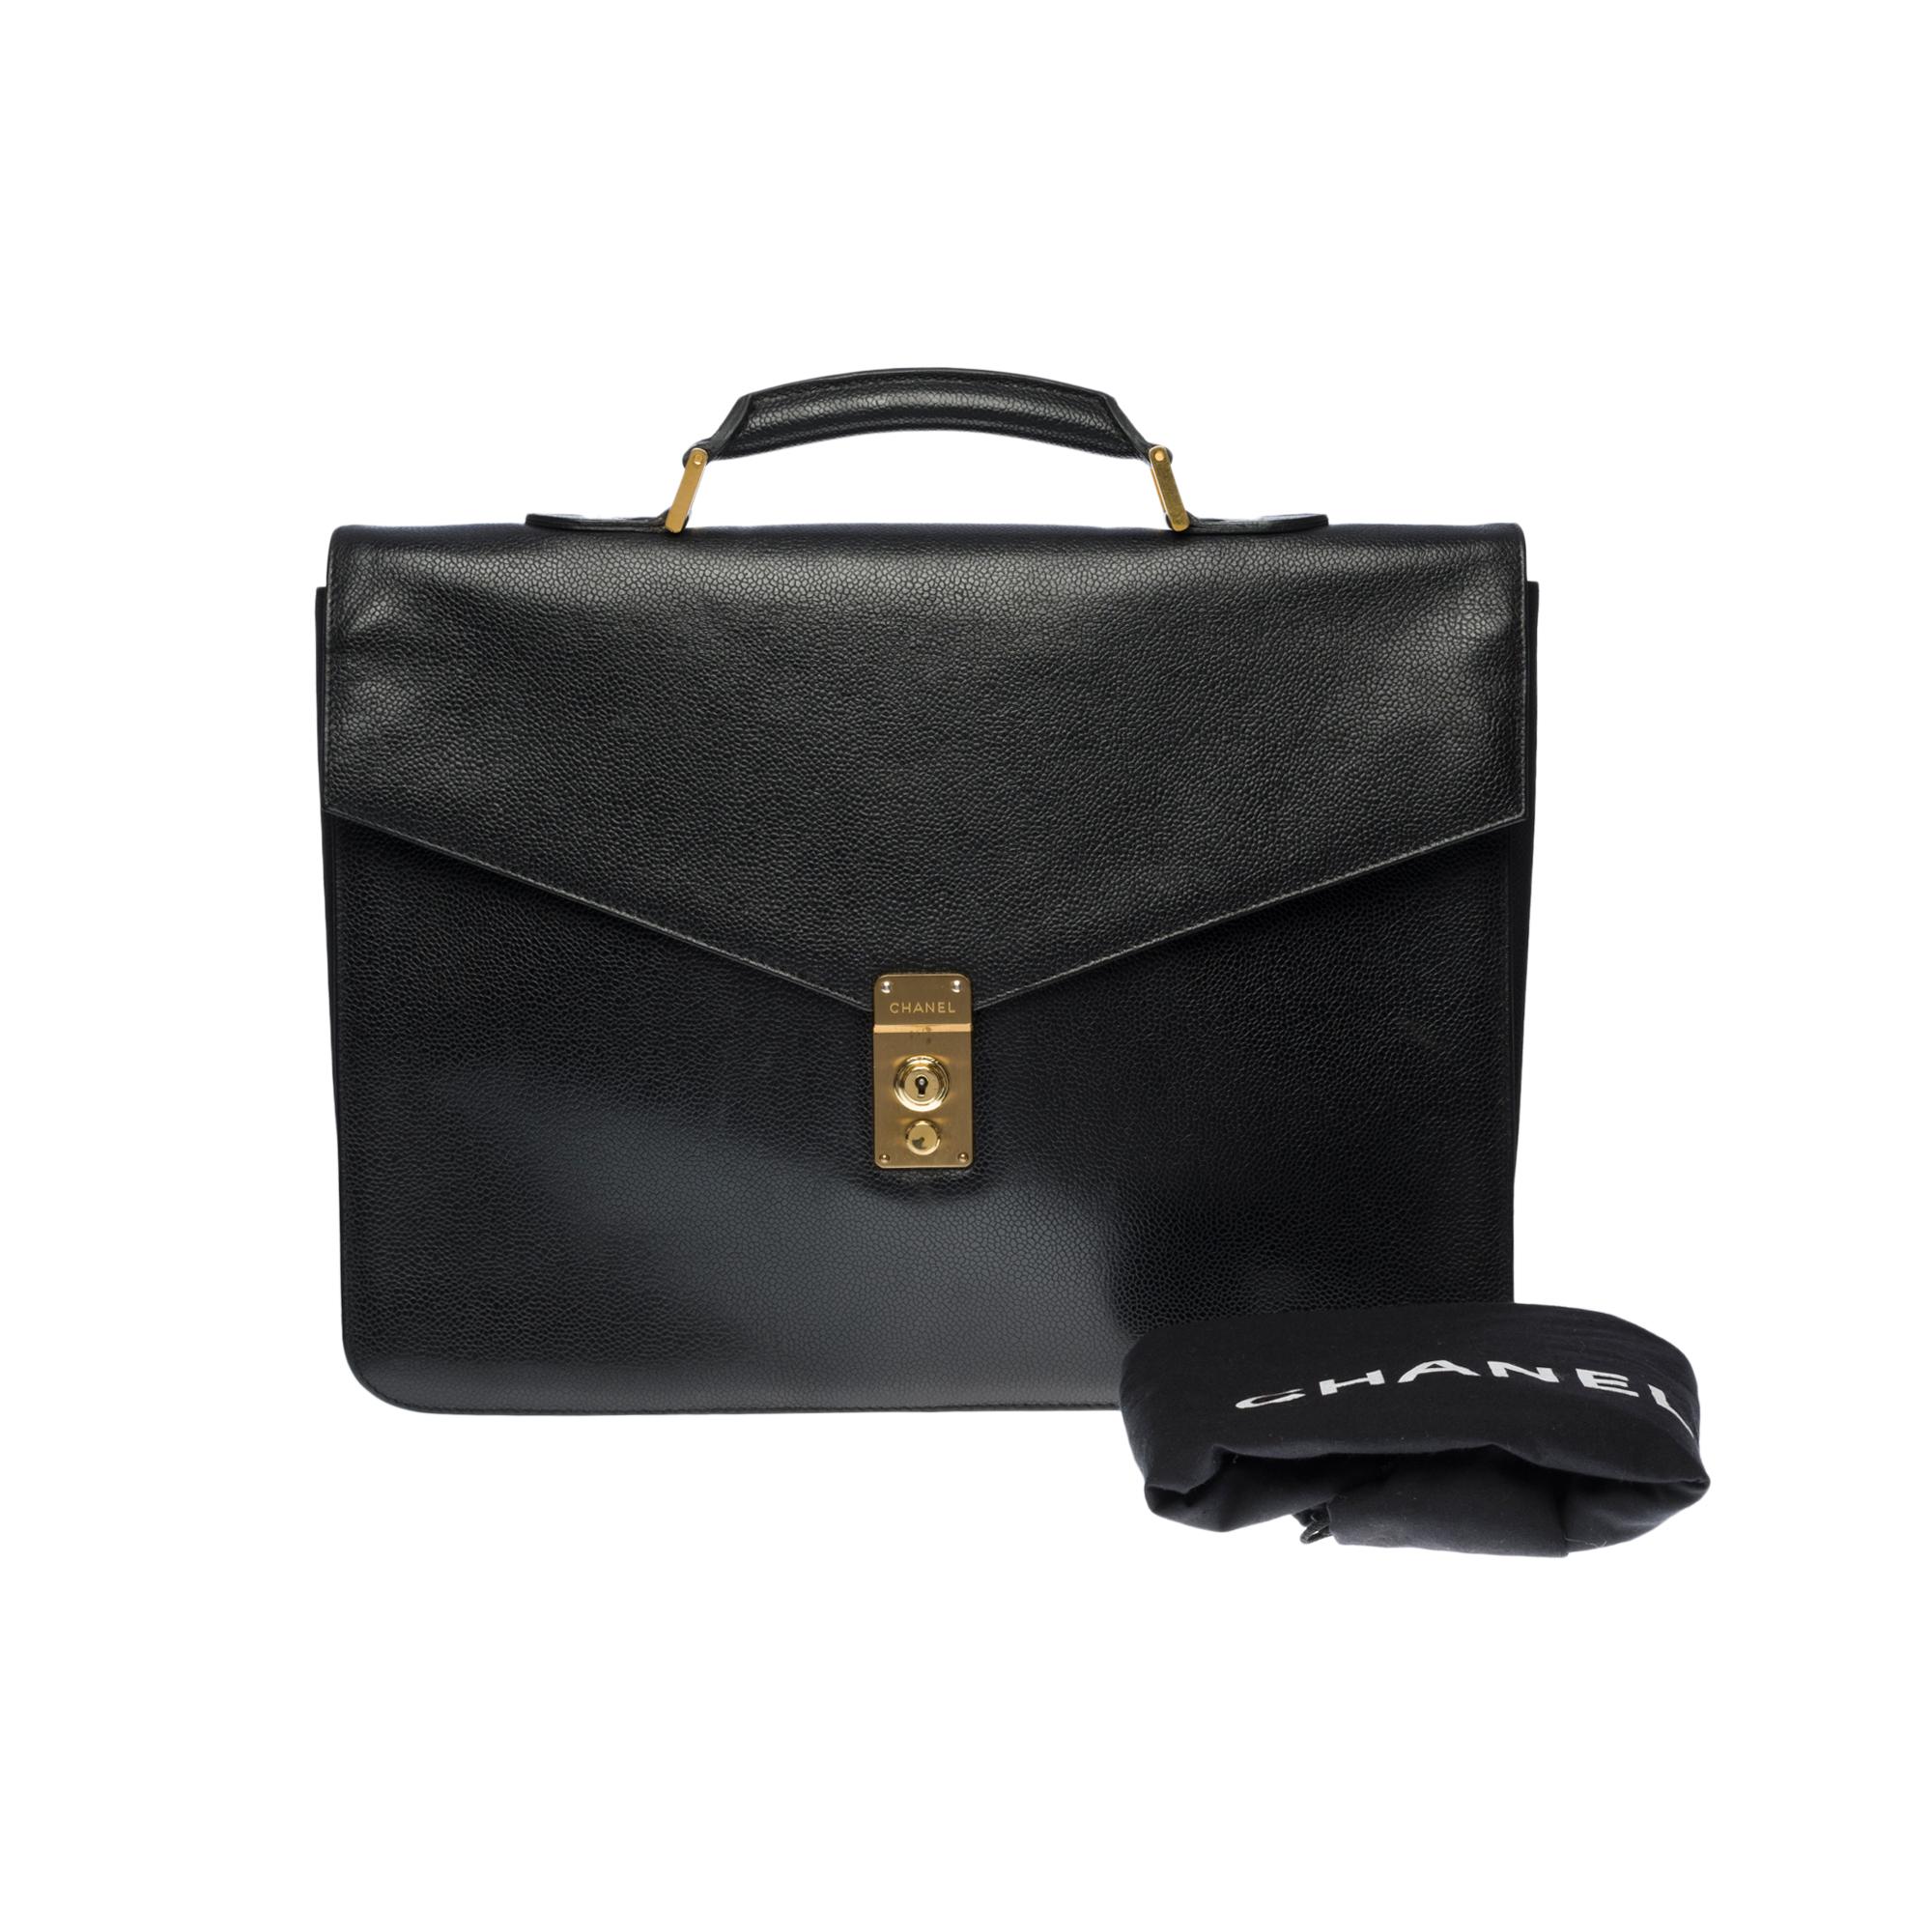 Chanel vintage Briefcase in black grained leather, GHW 5